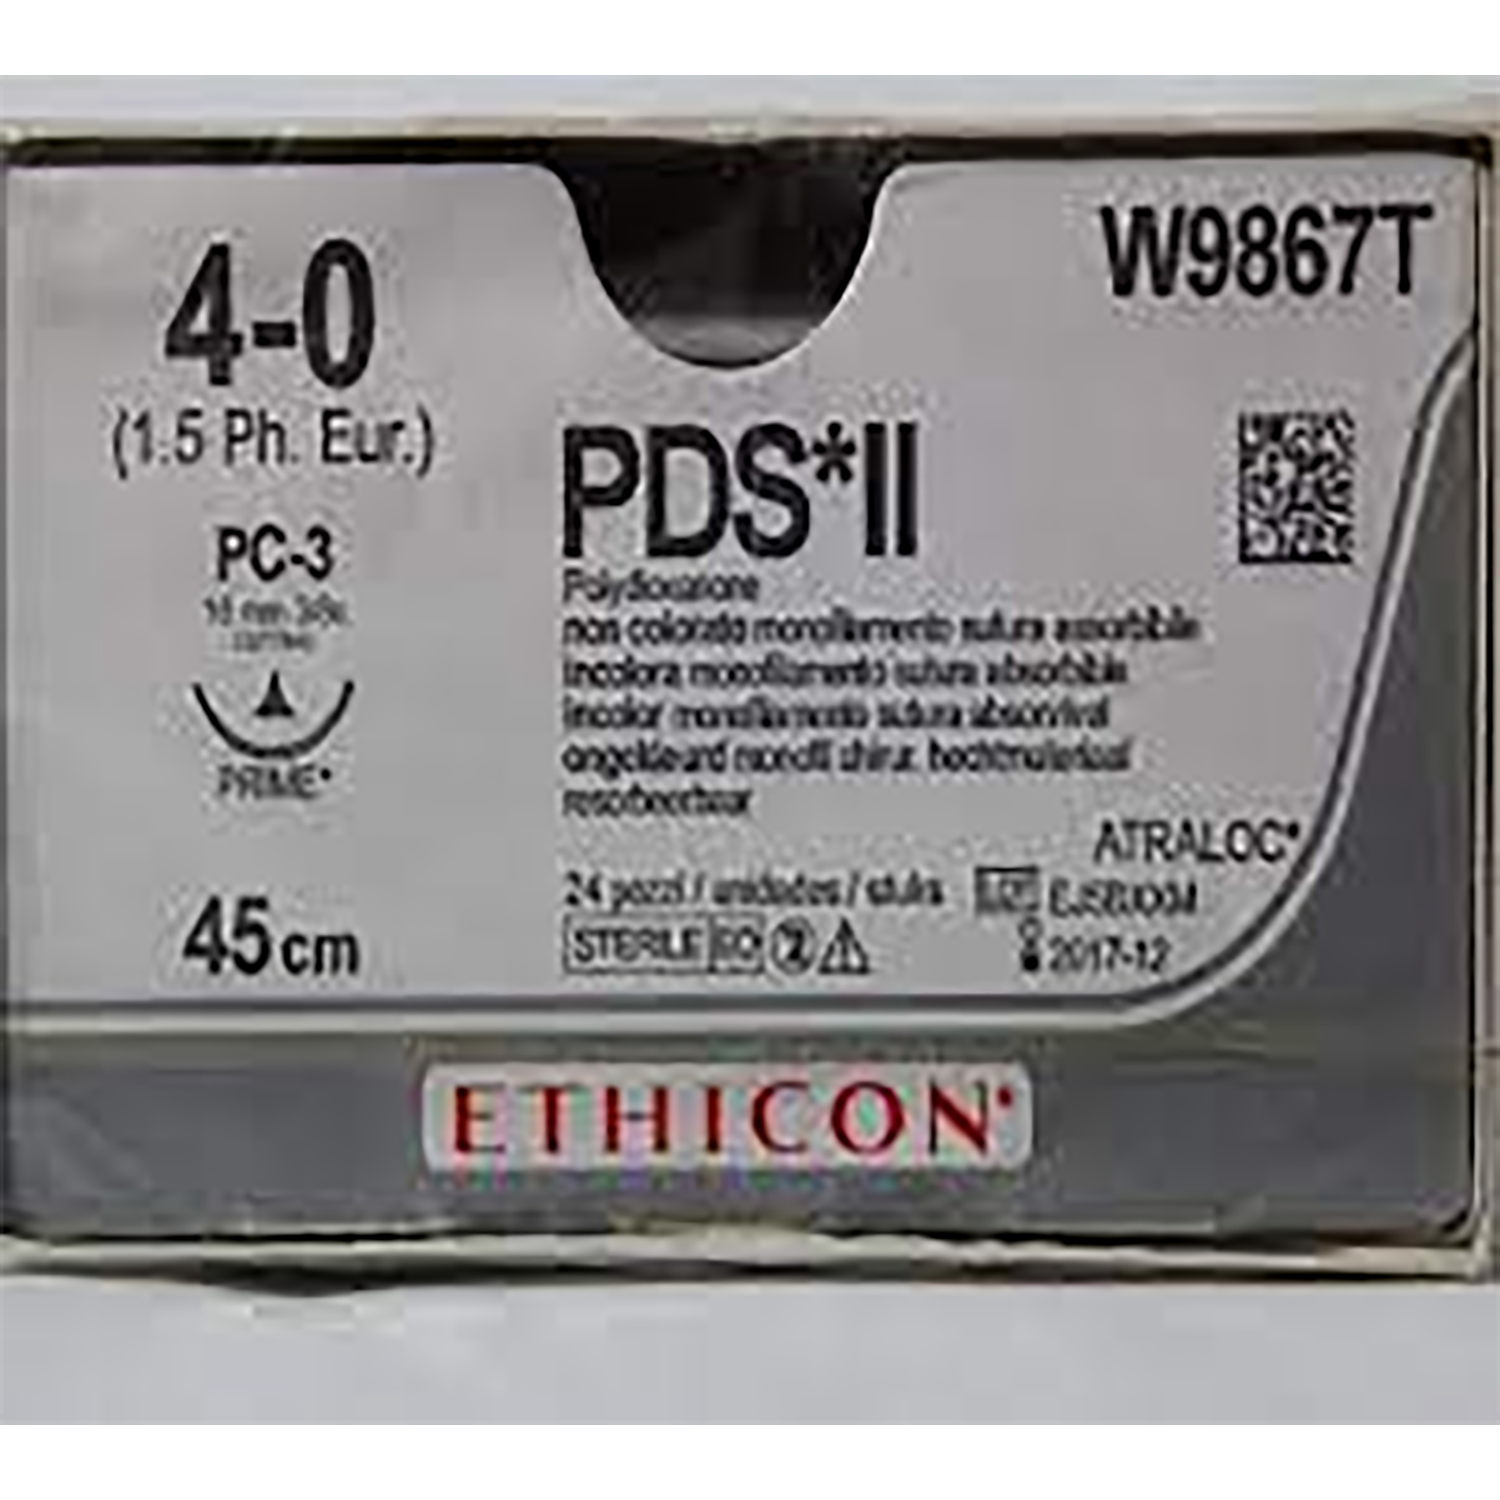 Ethicon PDS ll Sutures | Absorbable | Undyed | Size: 4-0 | Length: 45cm | Needle: PC-3 | Pack of 24